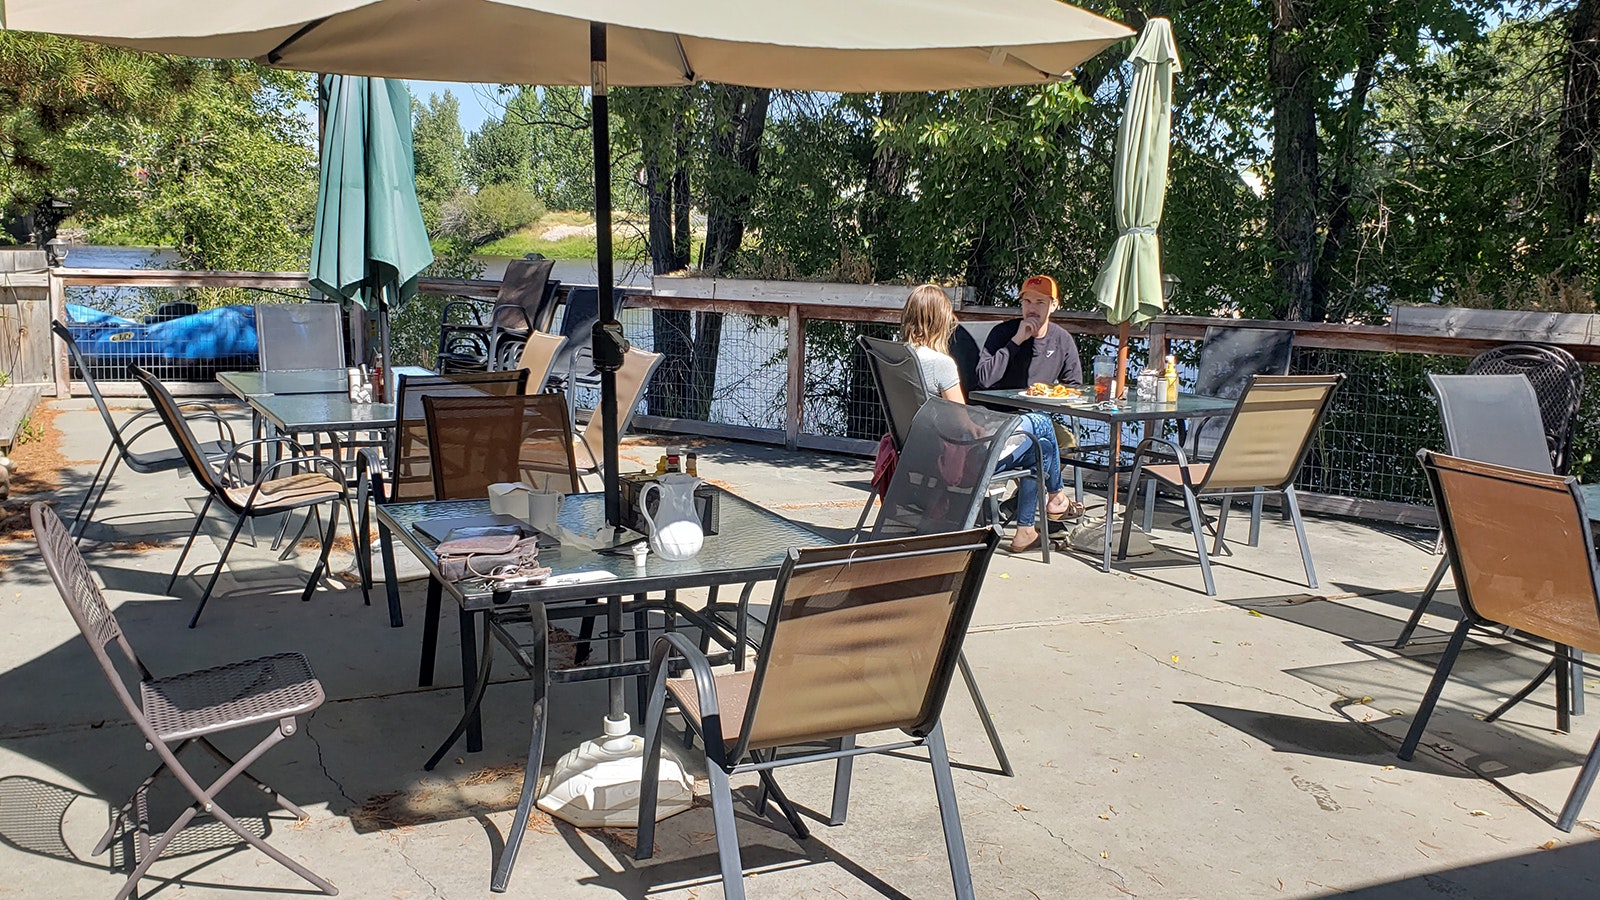 The riverside outdoor seating area at the J.W. Hugus Restaurant is popular during summertime.